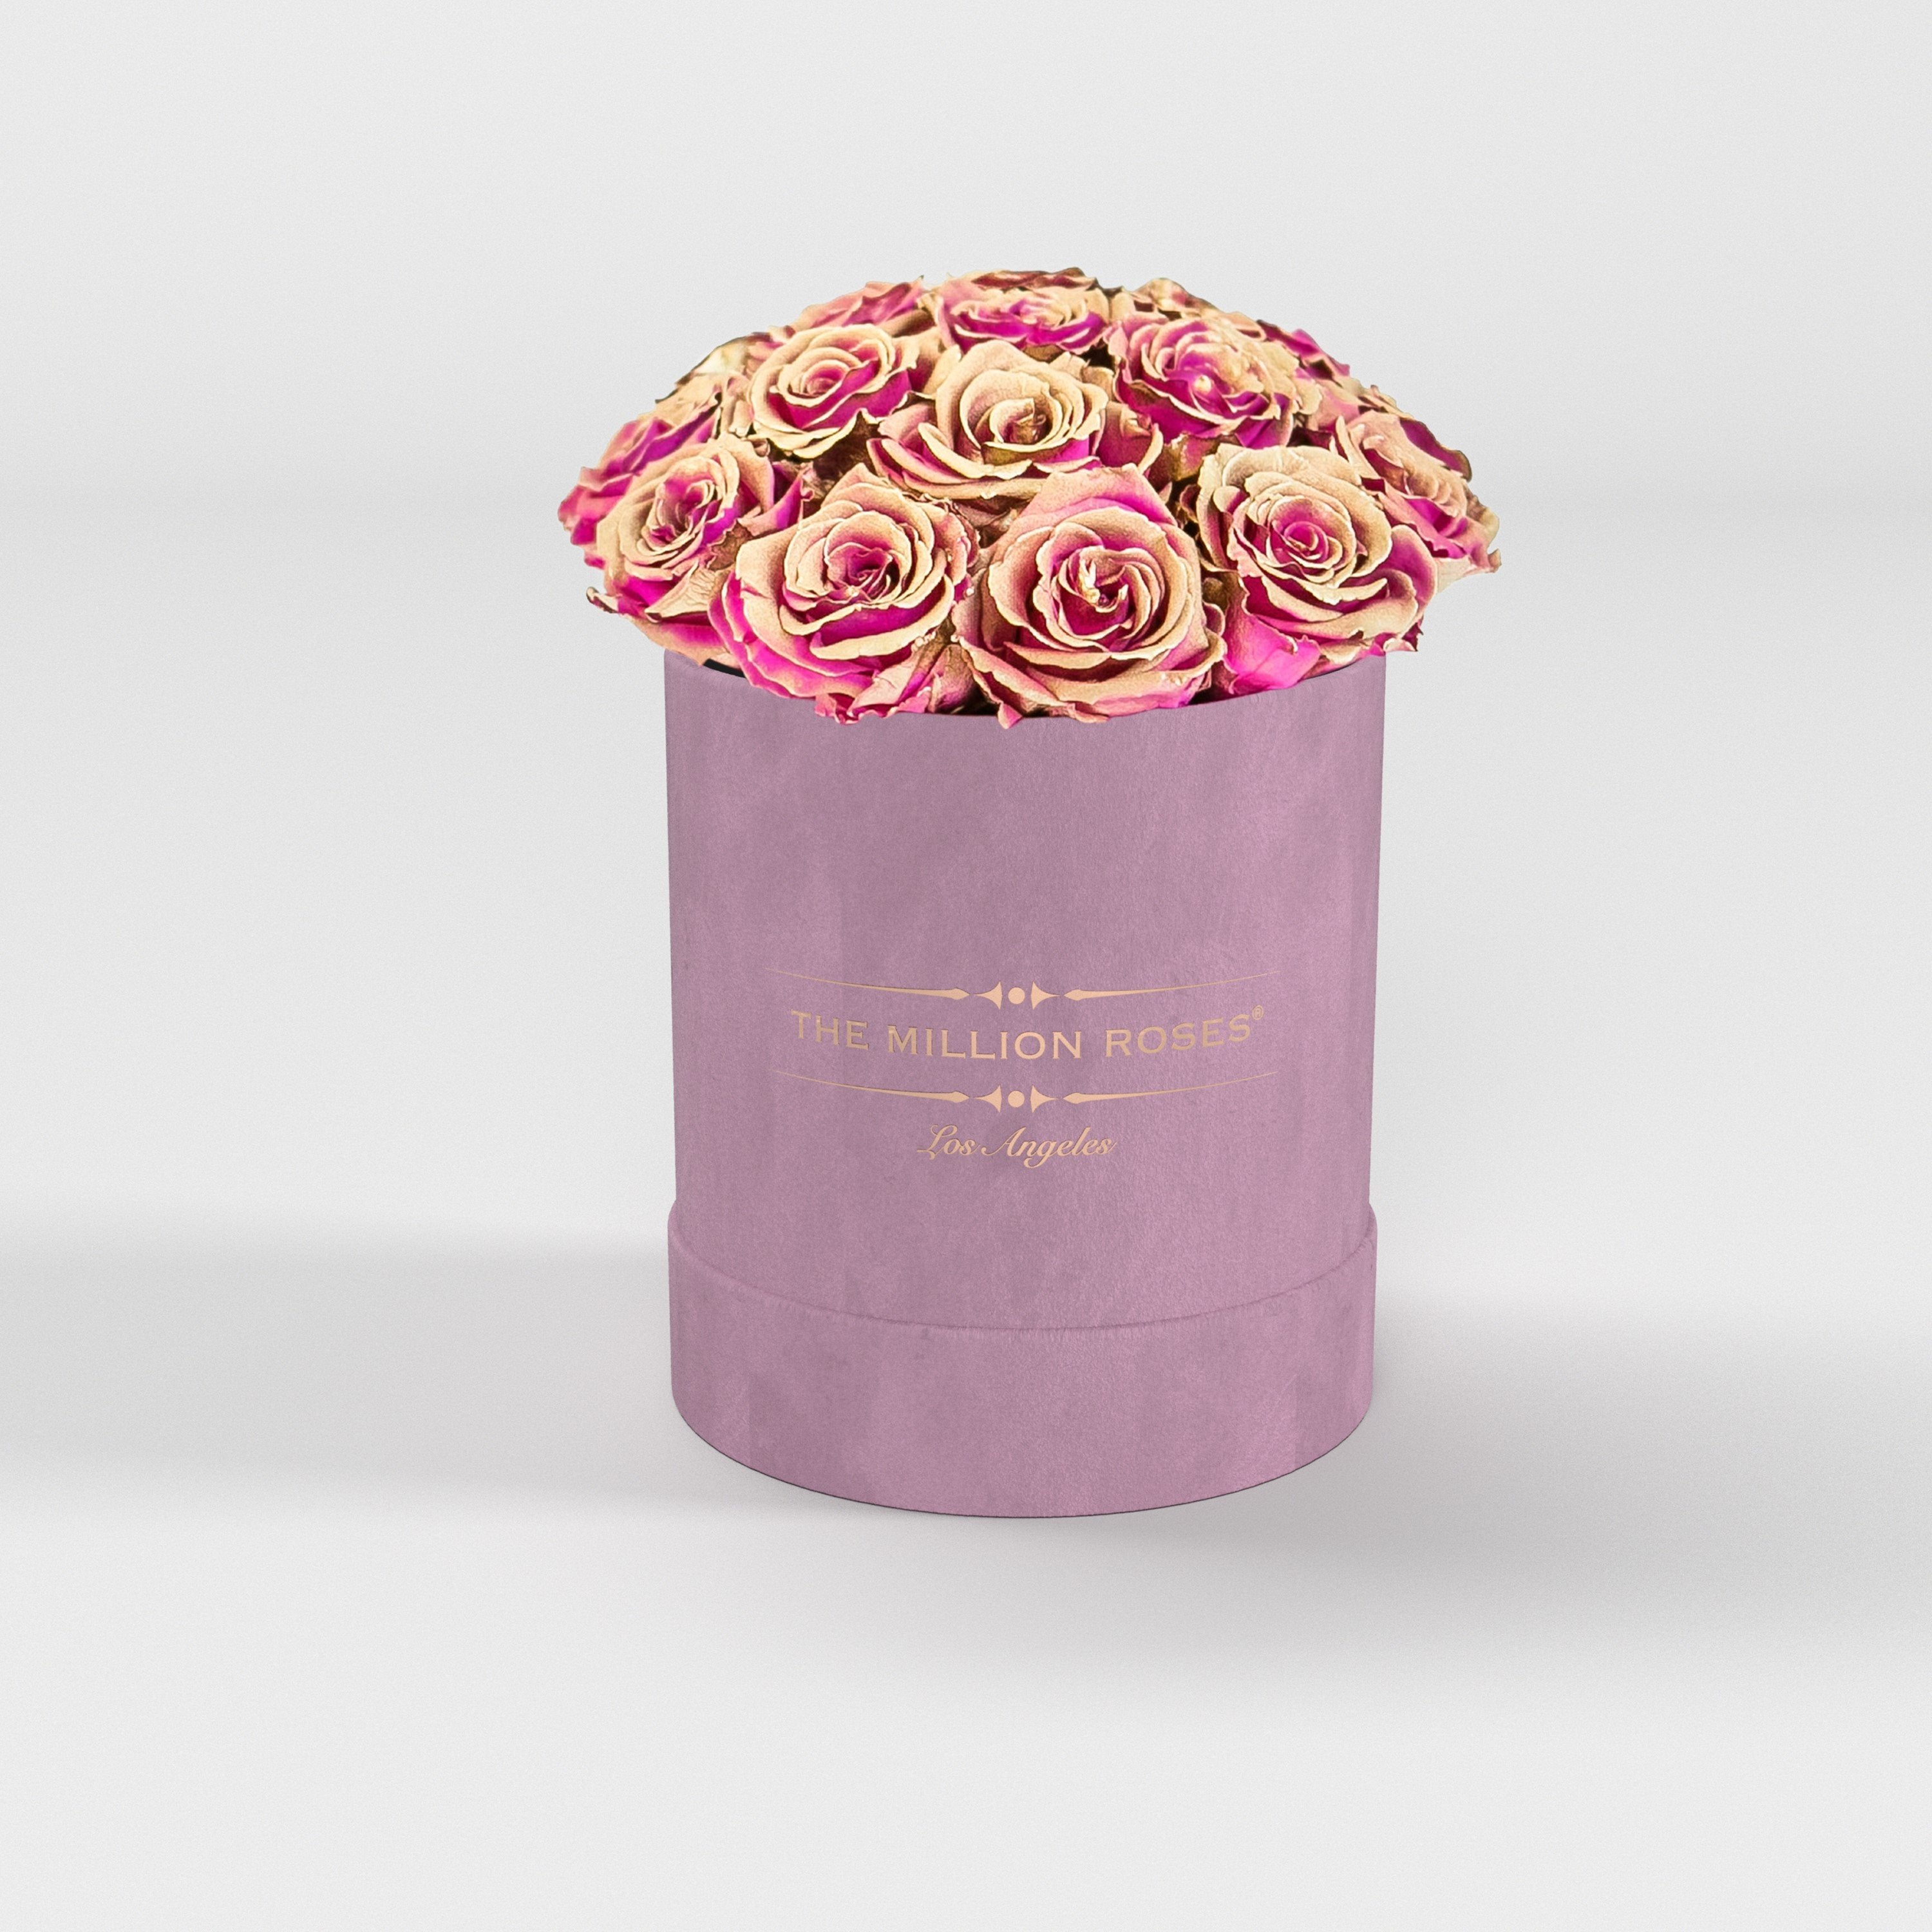 basic round box - light-pink suede box - neon-pink/gold roses